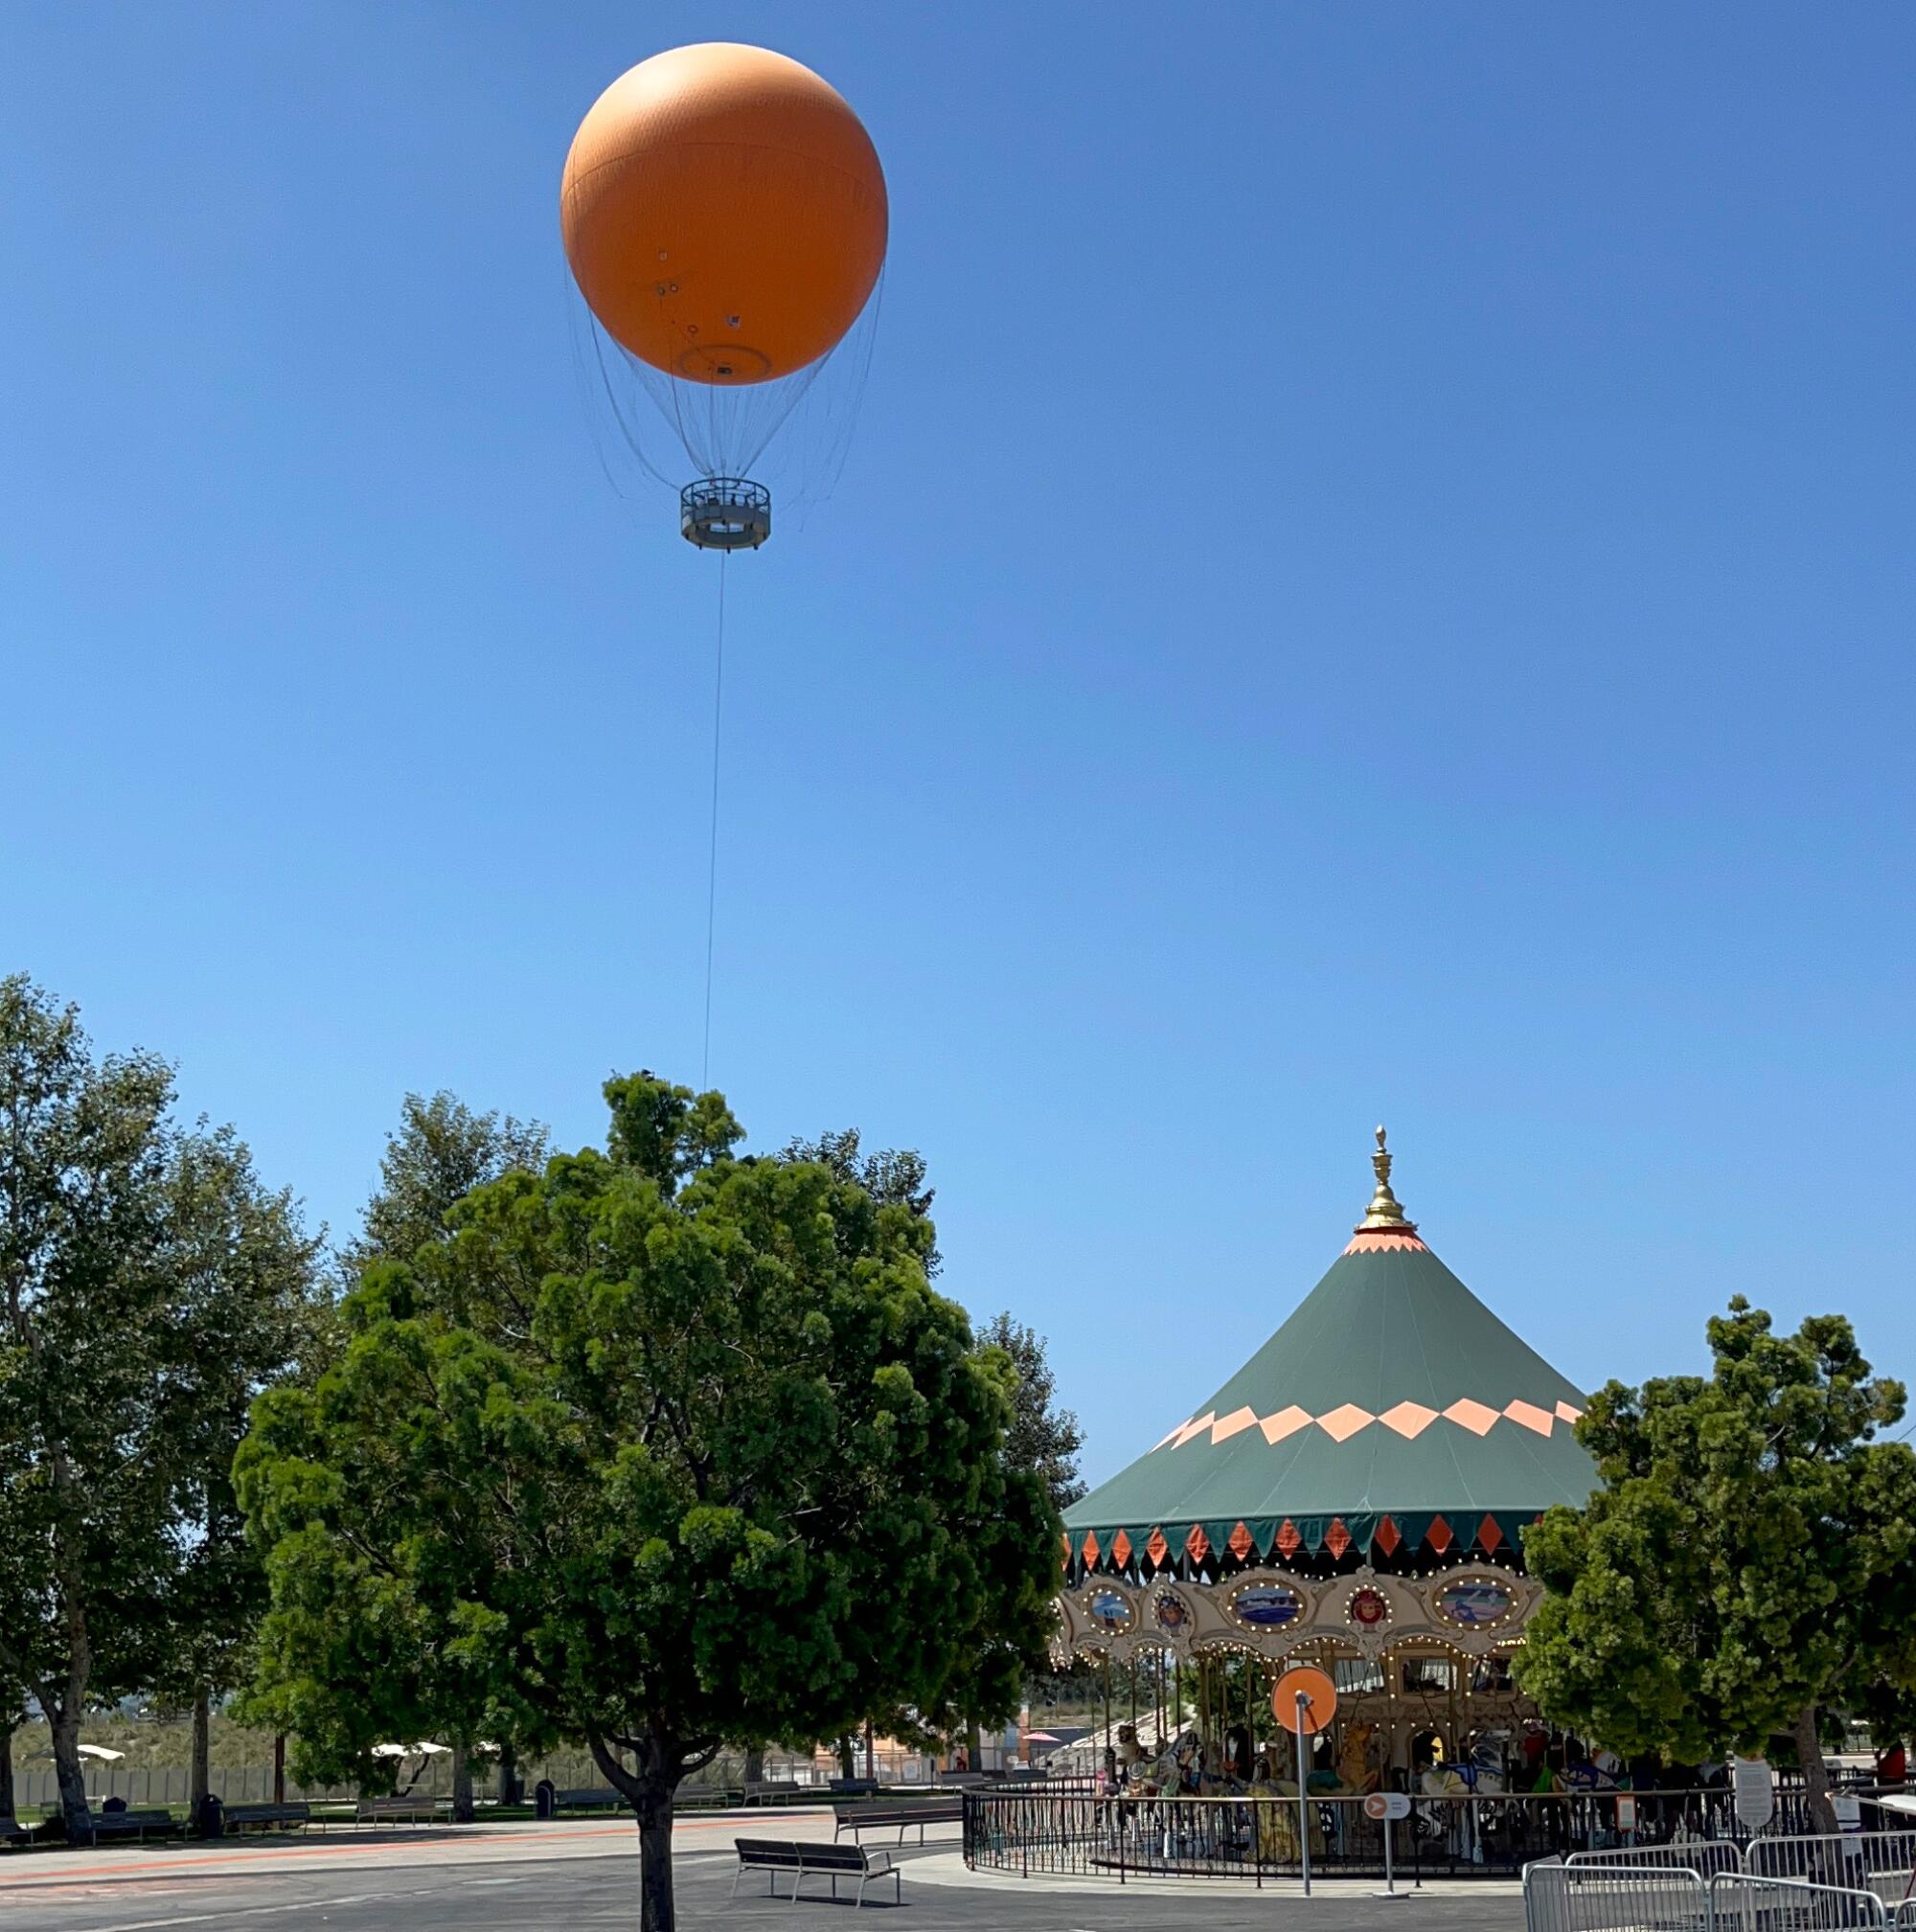 A giant balloon floats in the sky.